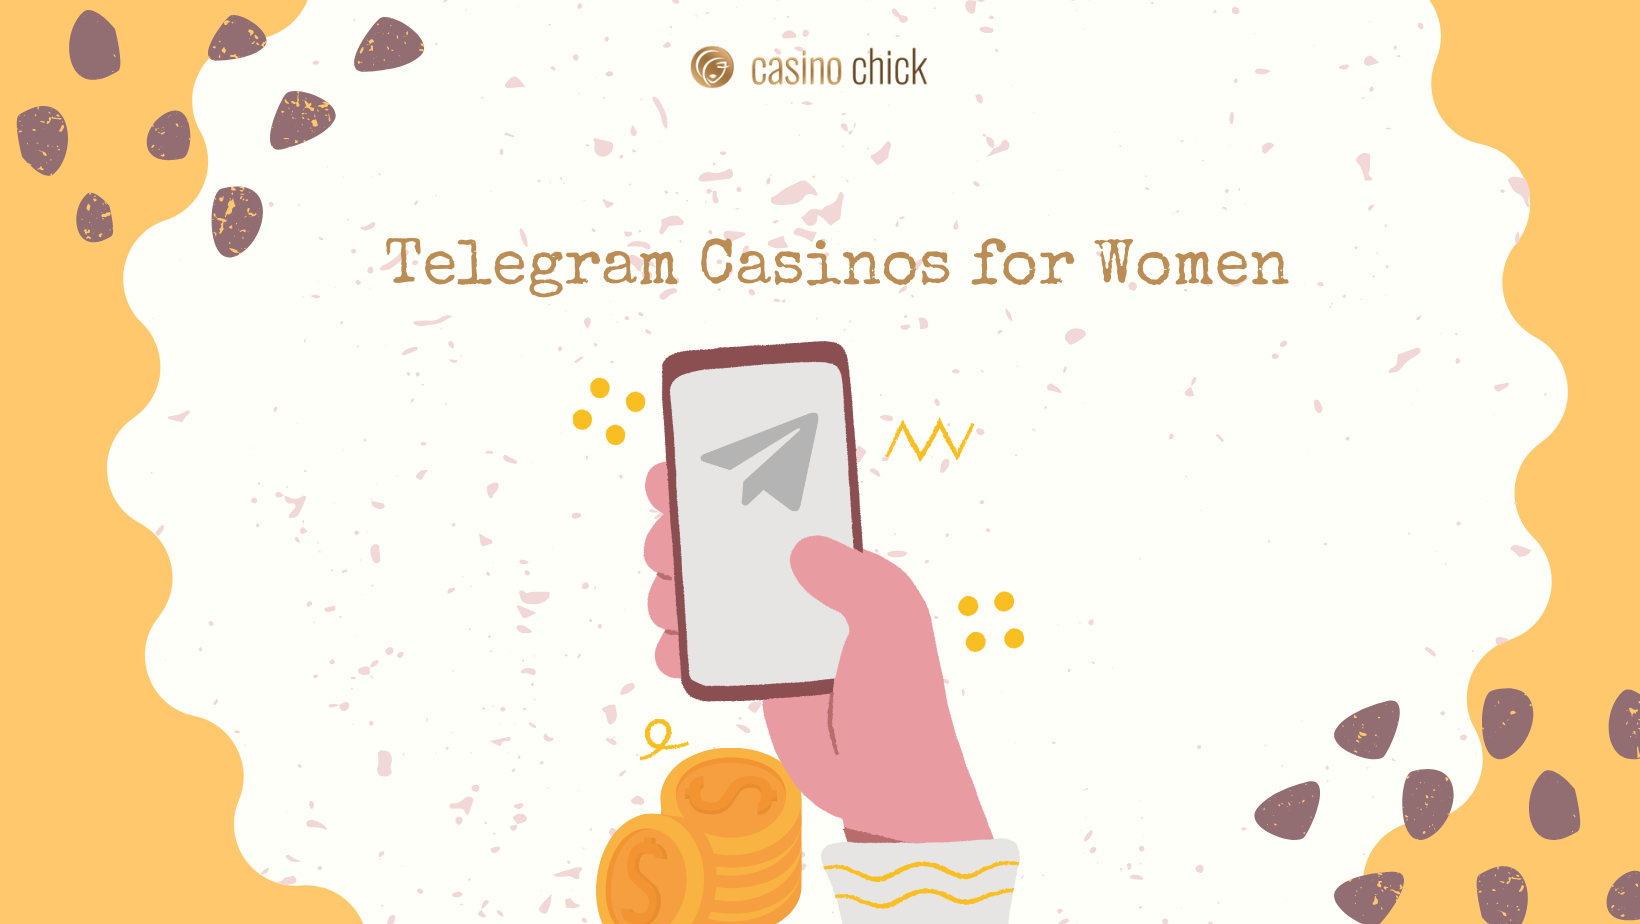 Telegram Casinos for Women: How to Join a TG Casino?